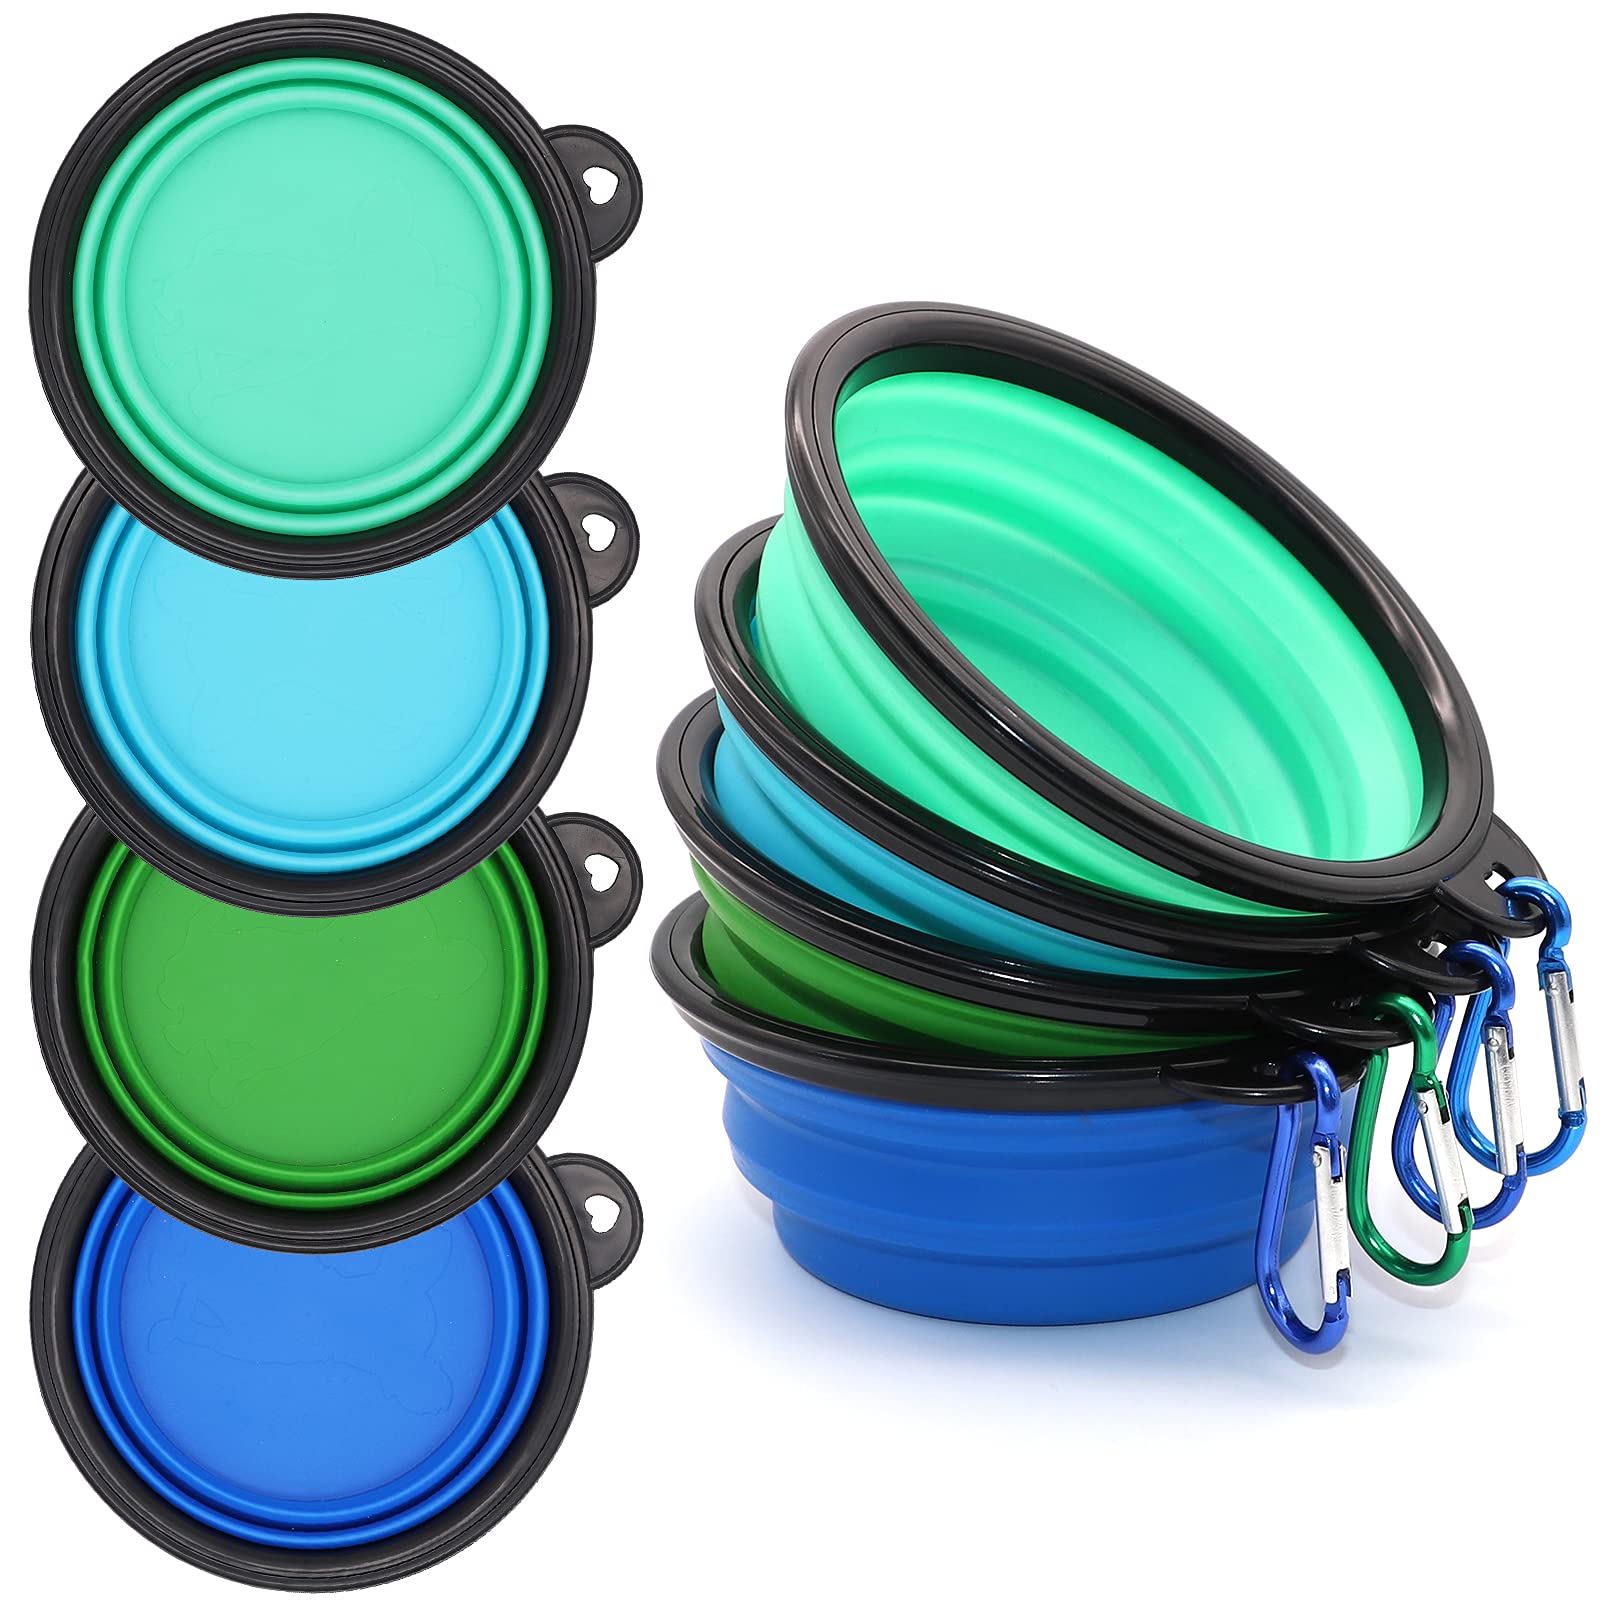 4 Pack Dog Bowls Collapsible,Portable and Foldable Pet Travel Bowls for  Dogs Cats Feeding Water Bowl Dish,with Carabiners Blue+Green+light  Blue+light Green